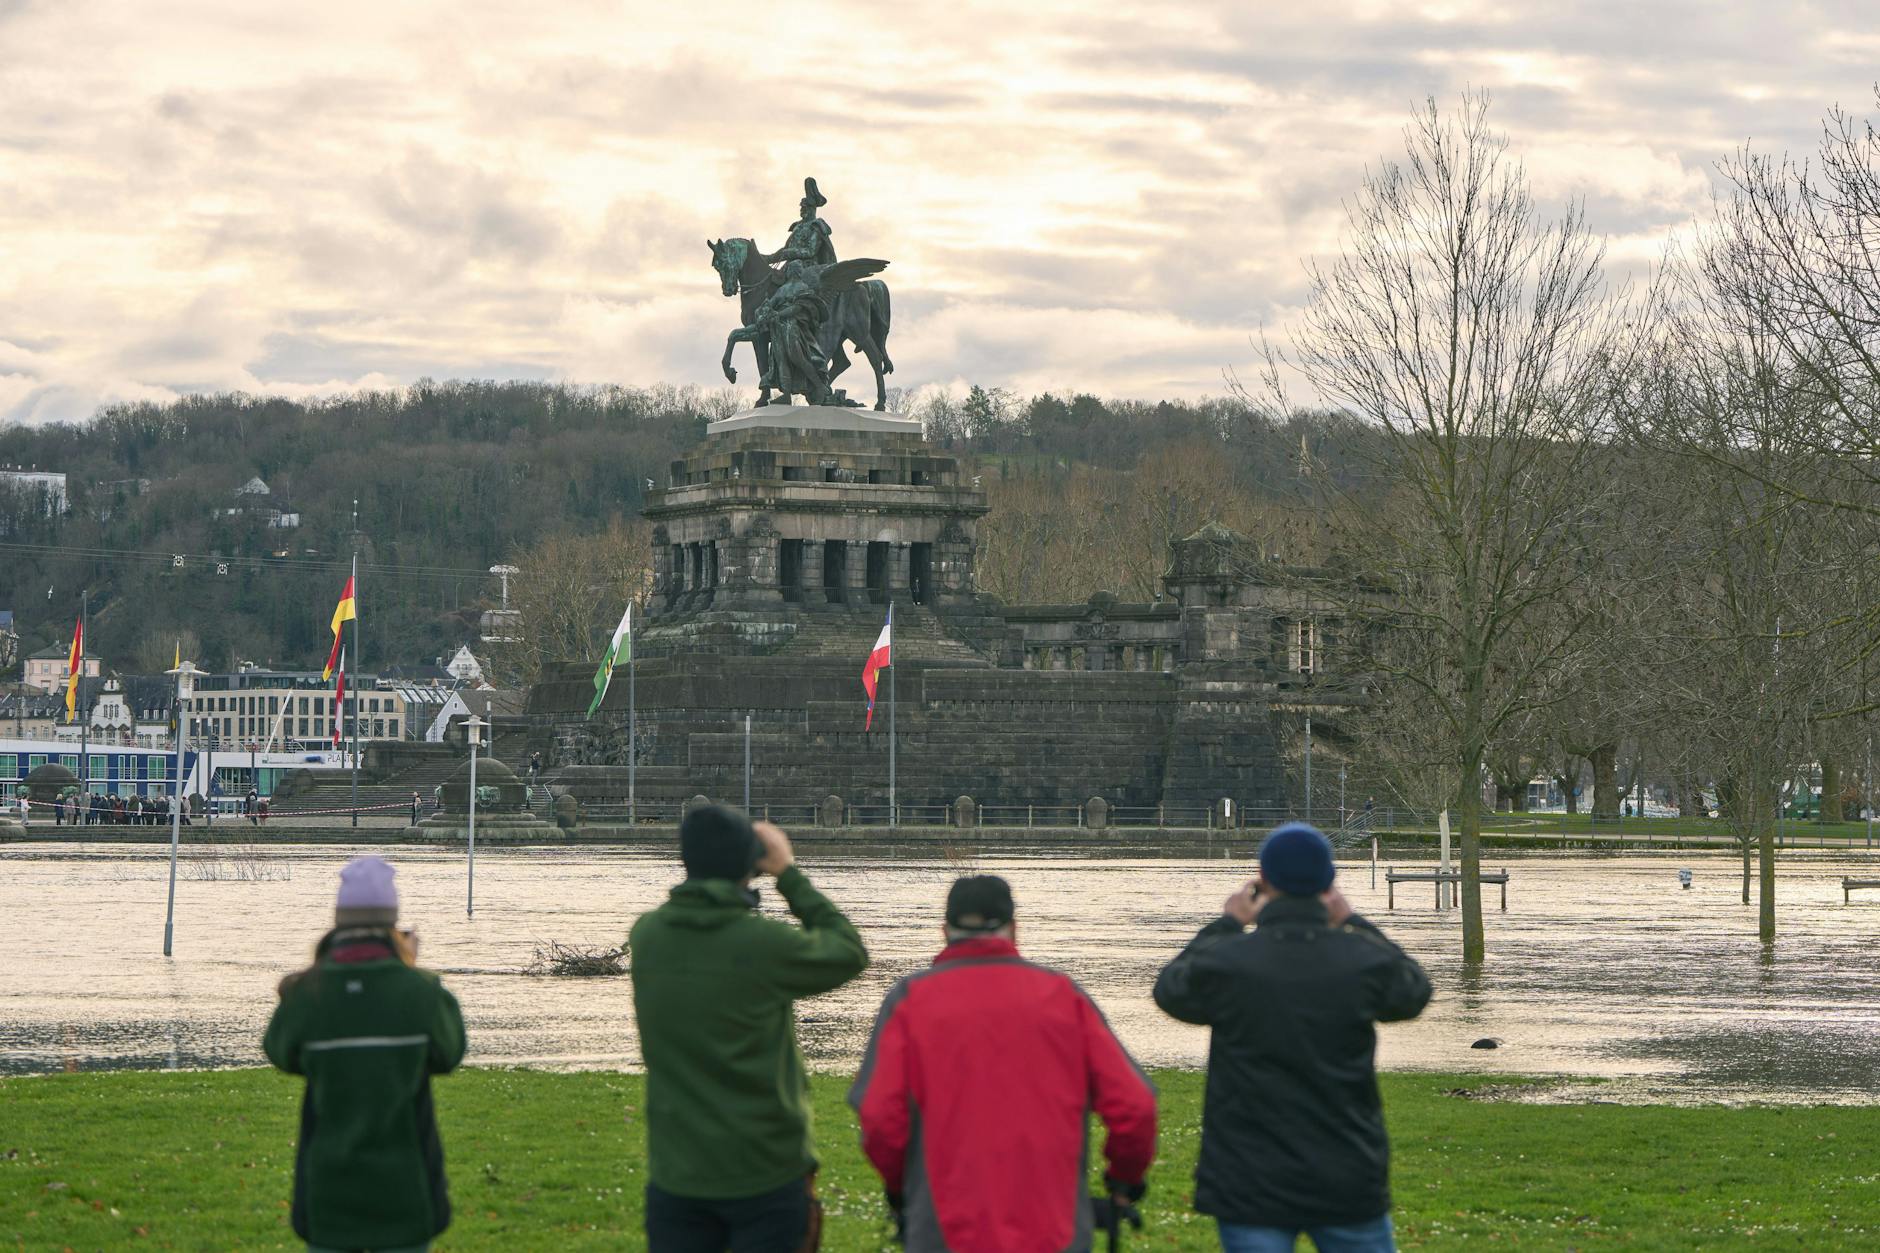 Koblenz: The Deutsches Eck with the equestrian statue of Kaiser Wilhelm stands surrounded by the Rhine floodwaters, which reach their crest on the Middle Rhine.